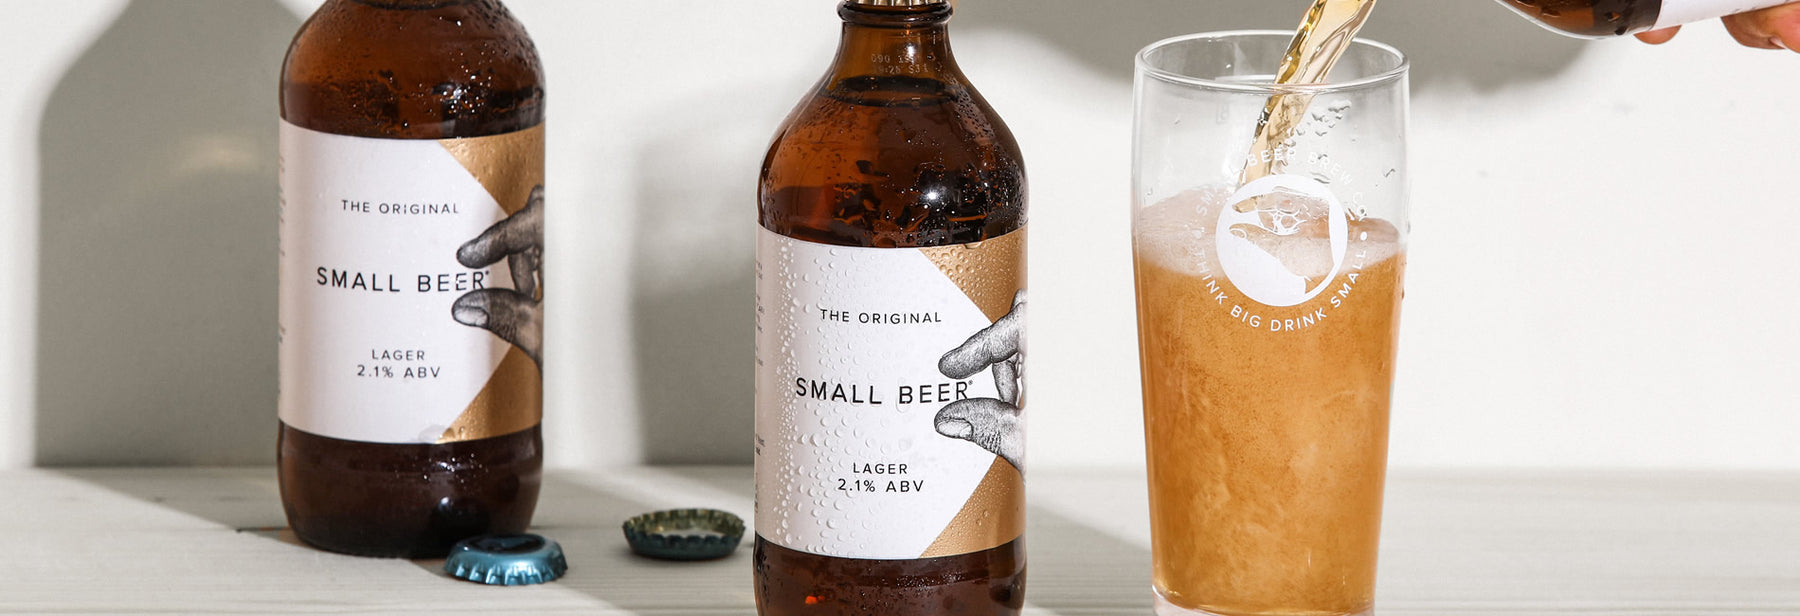 Small Beer low alcohol Lager